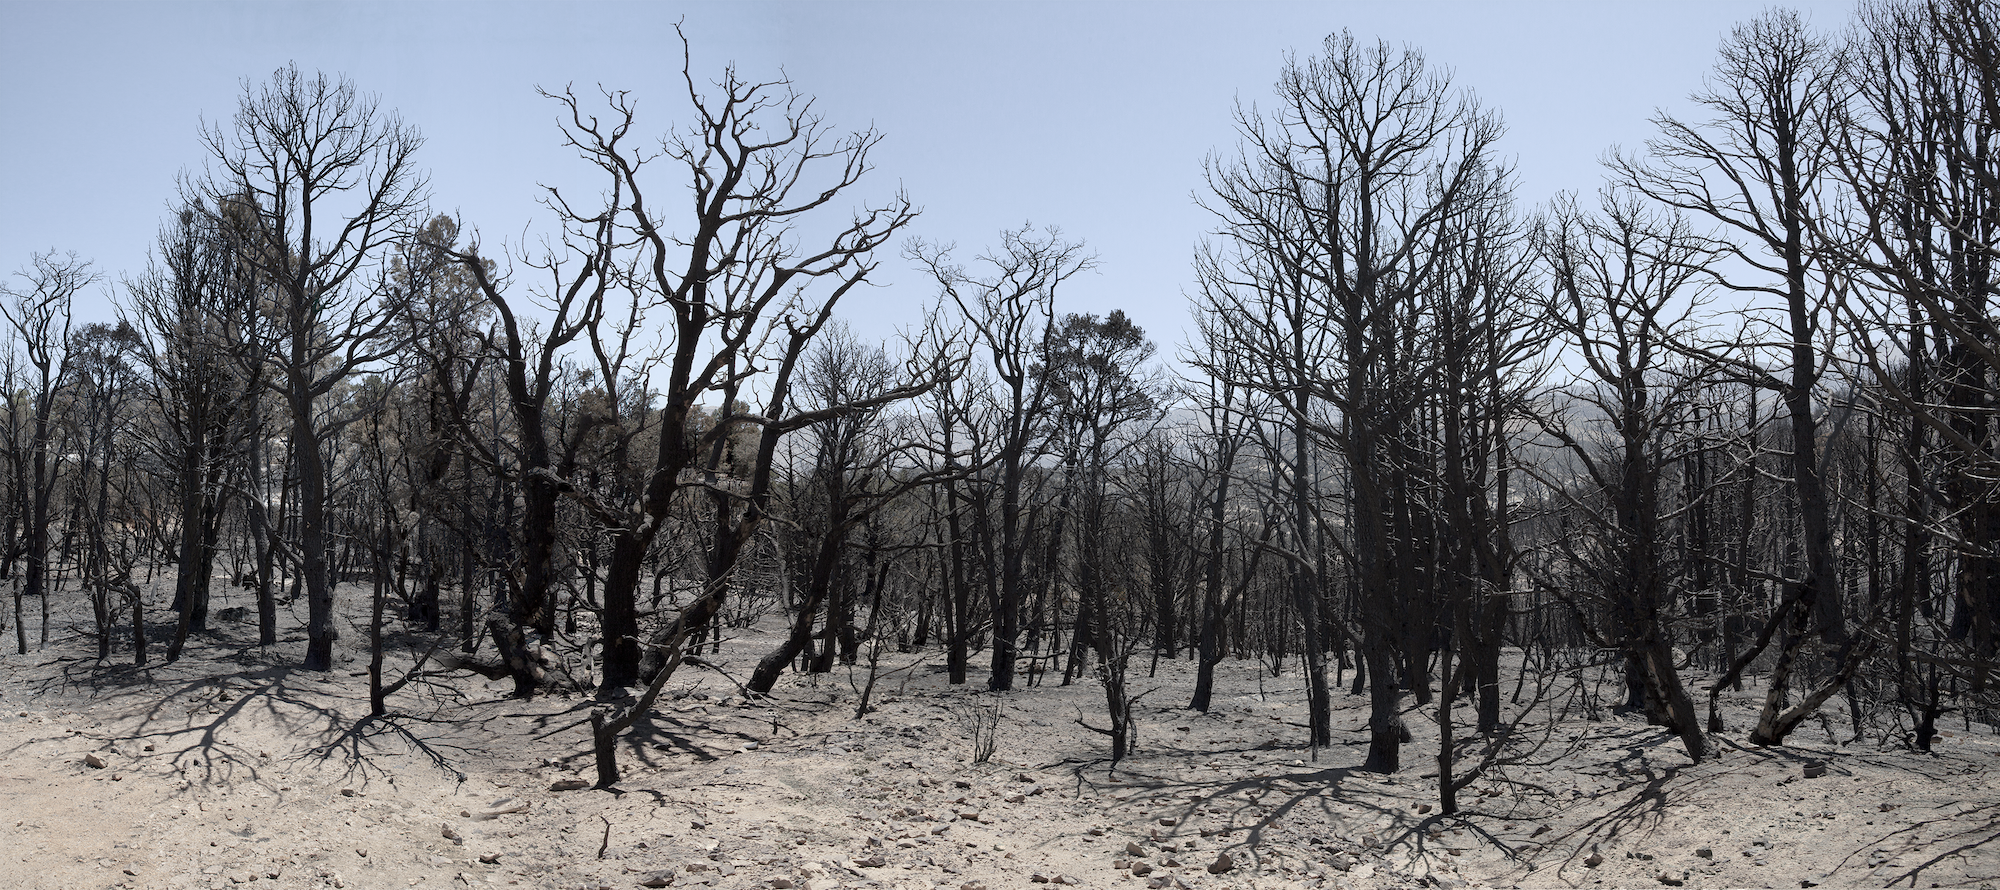 Photograph of burnt trees